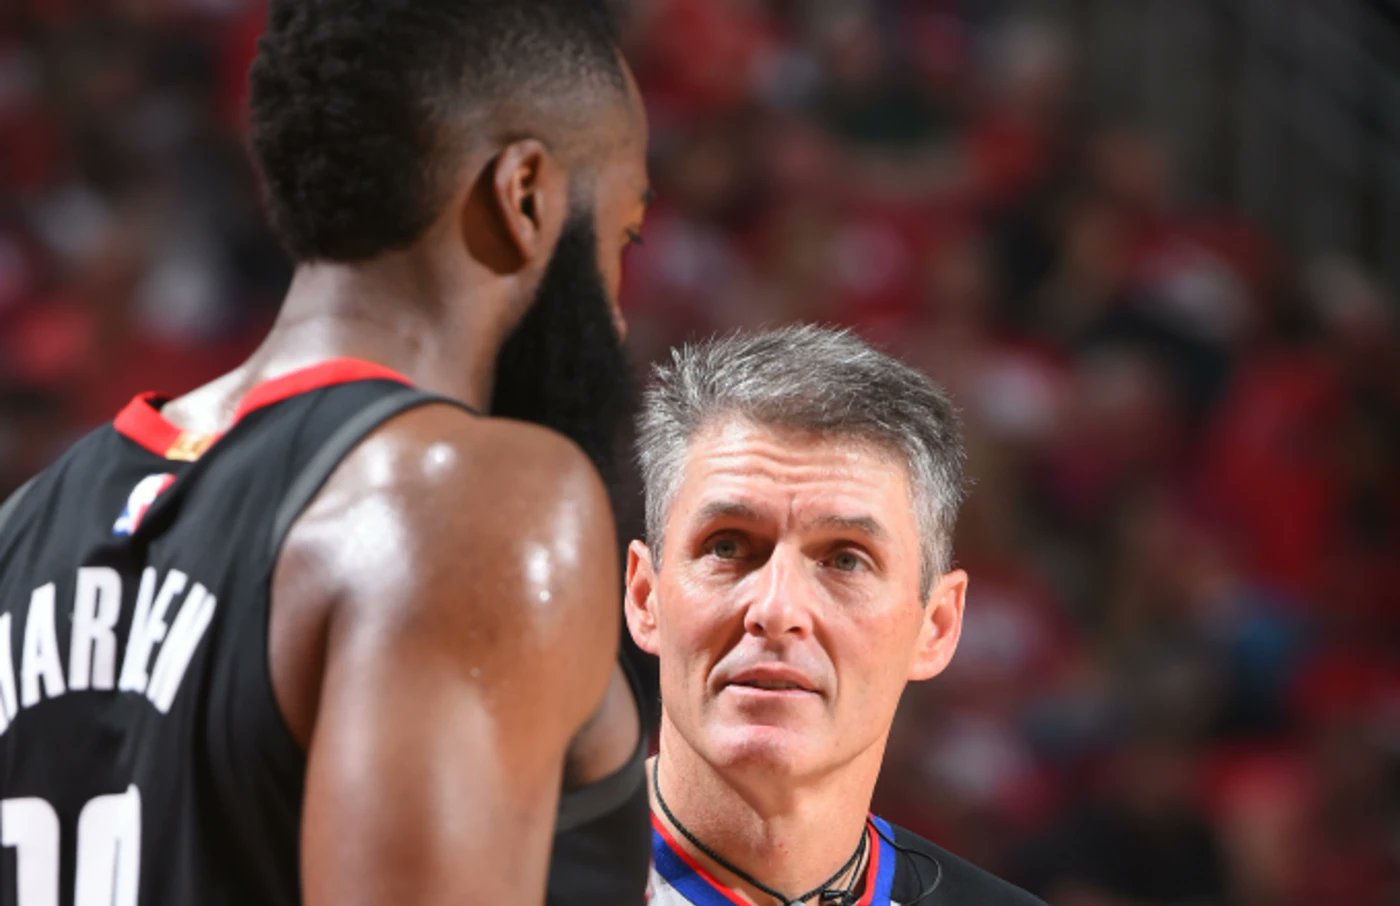 Fans, bettors of Celtics-76ers Game 7 voicing concerns about scheduled  referees Scott Foster and Eric Lewis